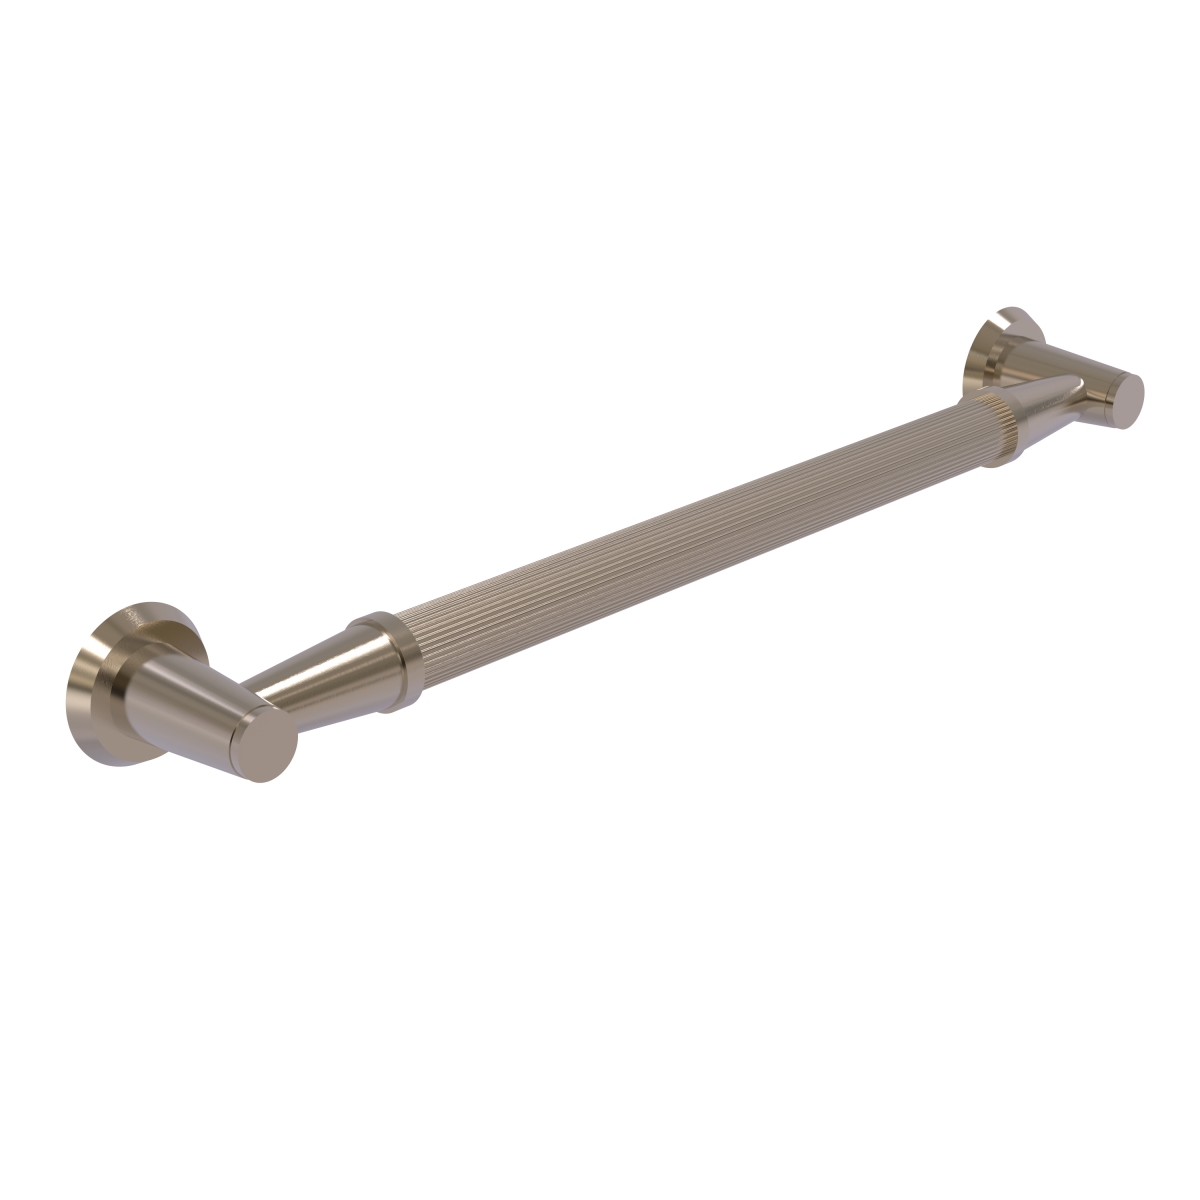 Picture of Allied Brass MD-GRR-36-PEW 36 in. Reeded Grab Bar, Antique Pewter - 3.5 x 38 x 36 in.